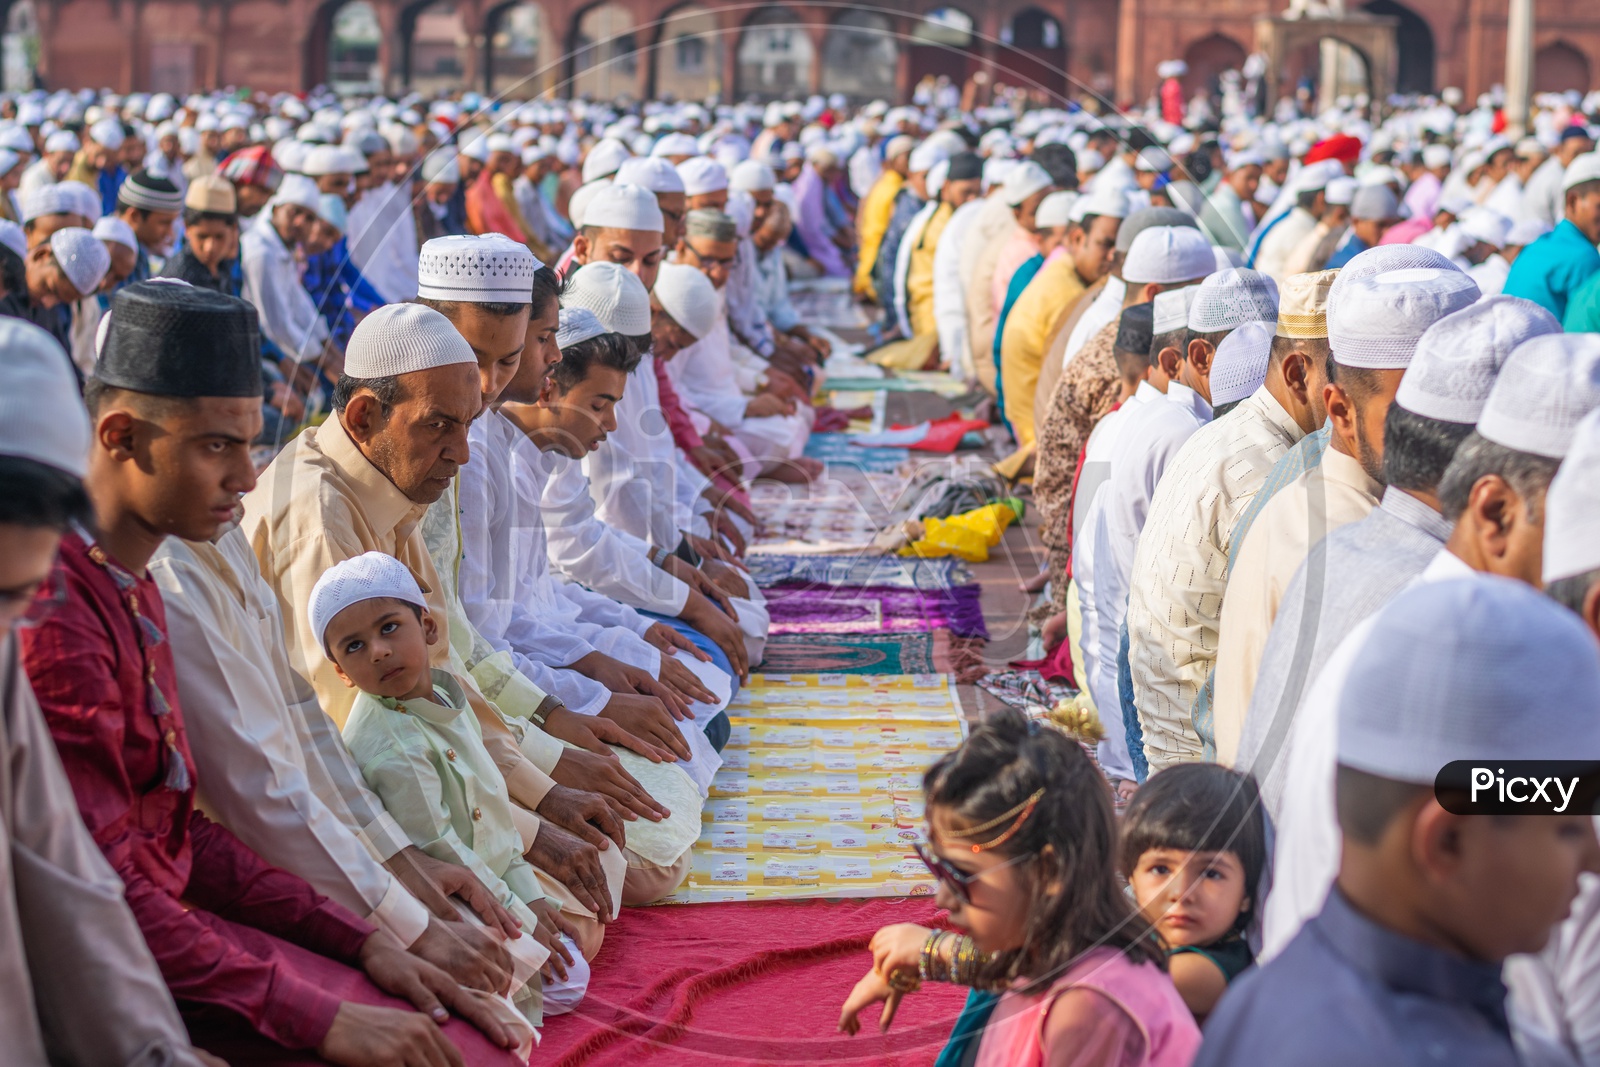 Men and a child Praying Namaz on the day of Eid-ul-Fitr (End of the holy month of Ramadan) at Jama Masjid, Delhi